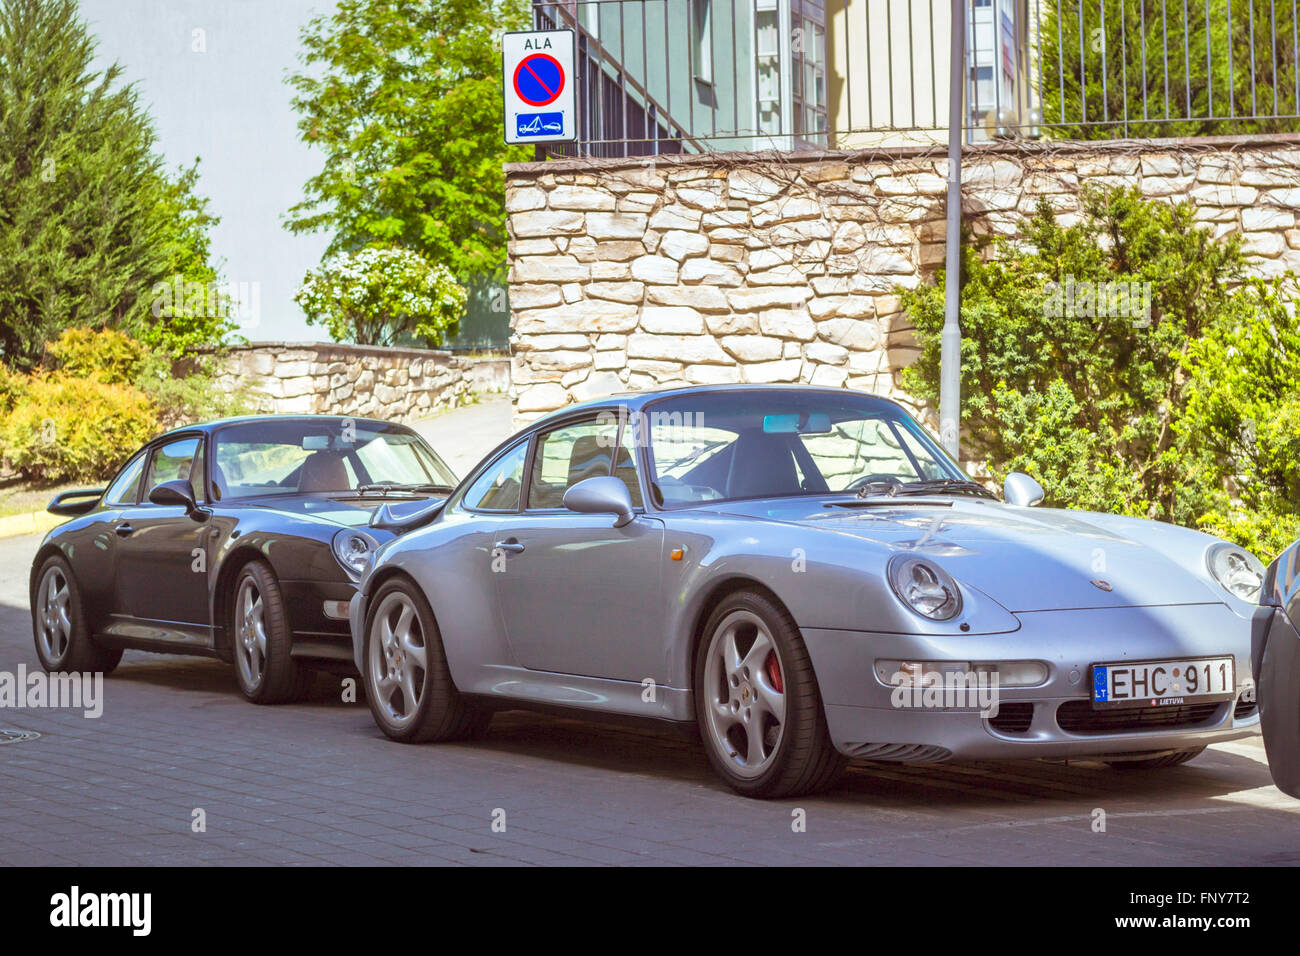 Tallinn, Estonia - June 12, 2015: Two sports coupe car Porsche parked in yard of the stone wall under the sign Parking Stock Photo